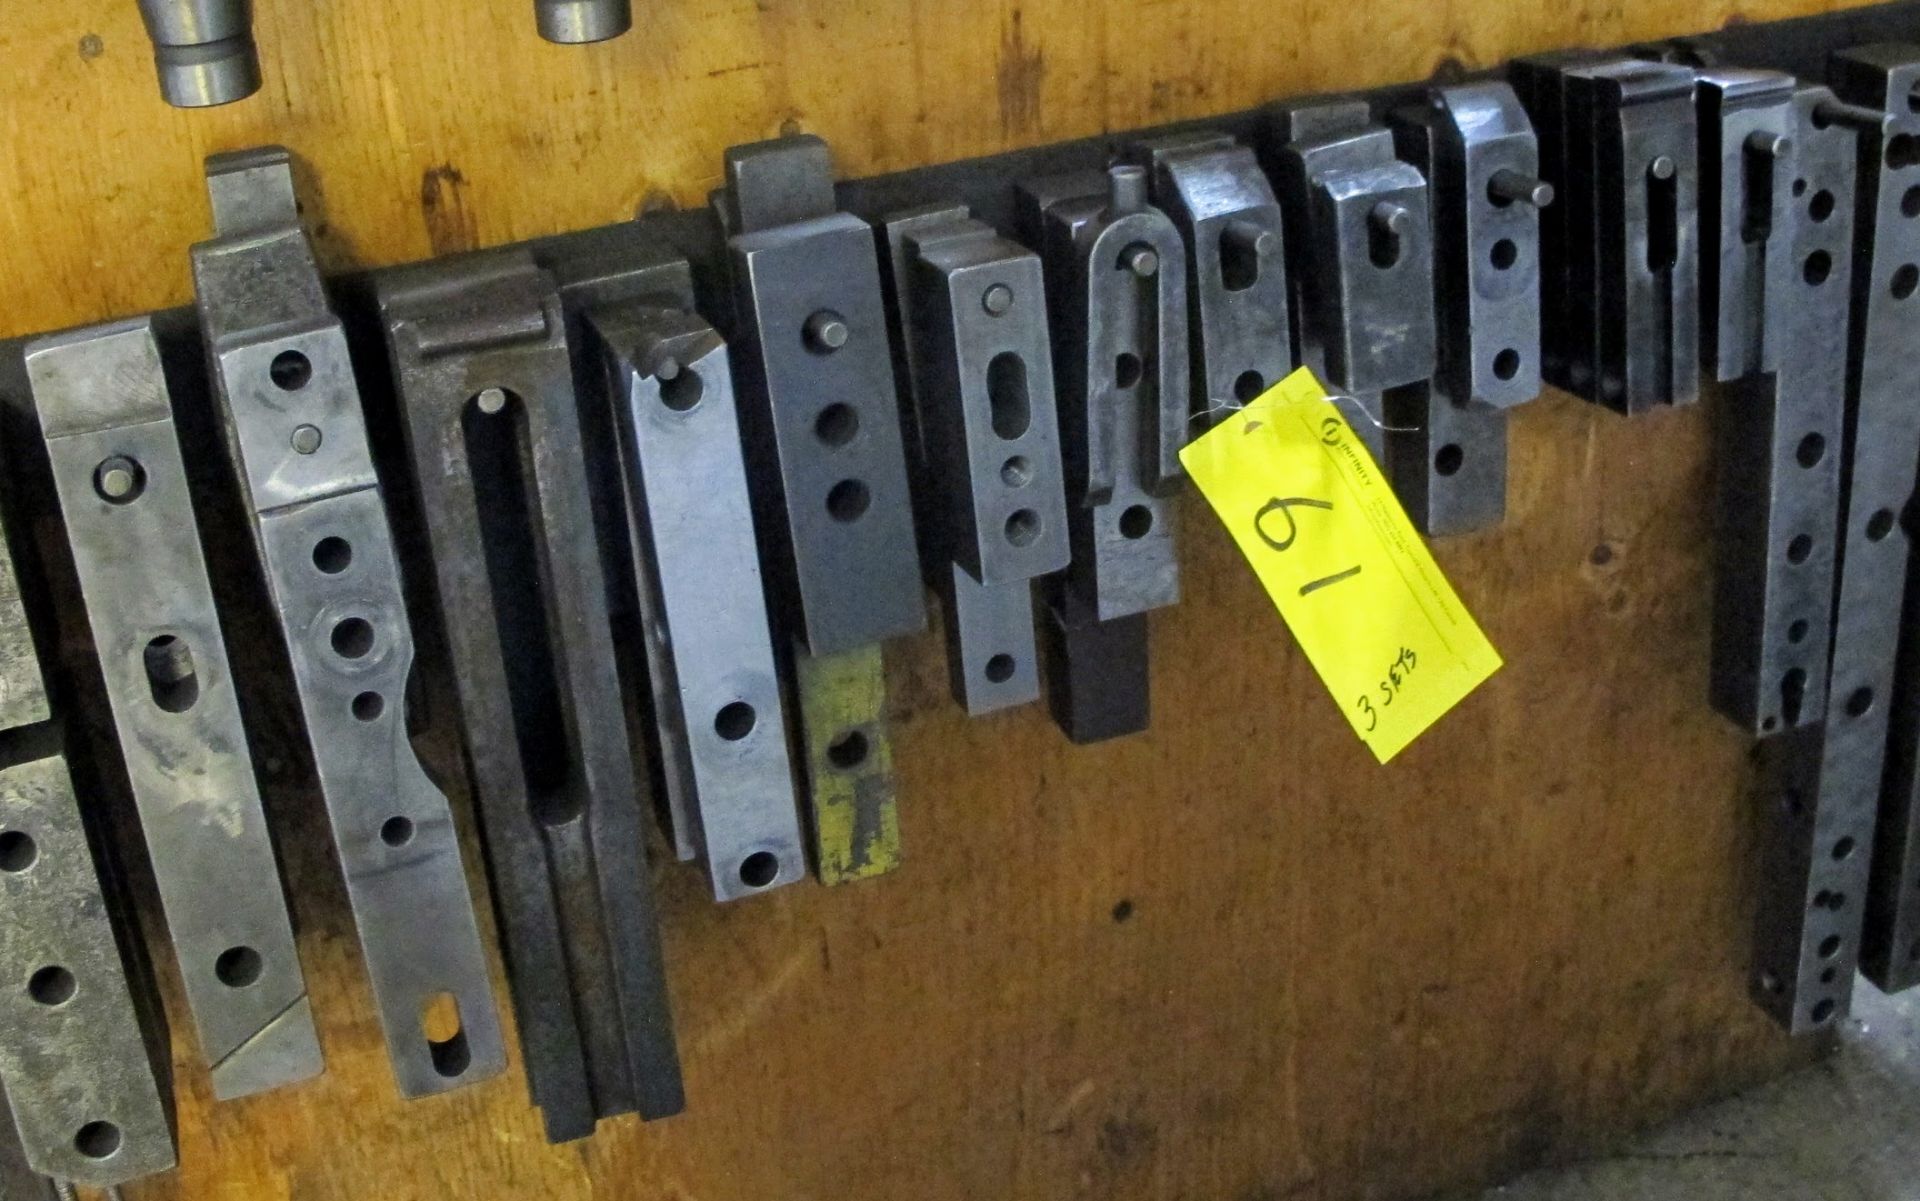 LOT OF MACHINE SCREWS, HOLD DOWNS AND CLAMPING BARS (NO BENCH) - Image 4 of 4